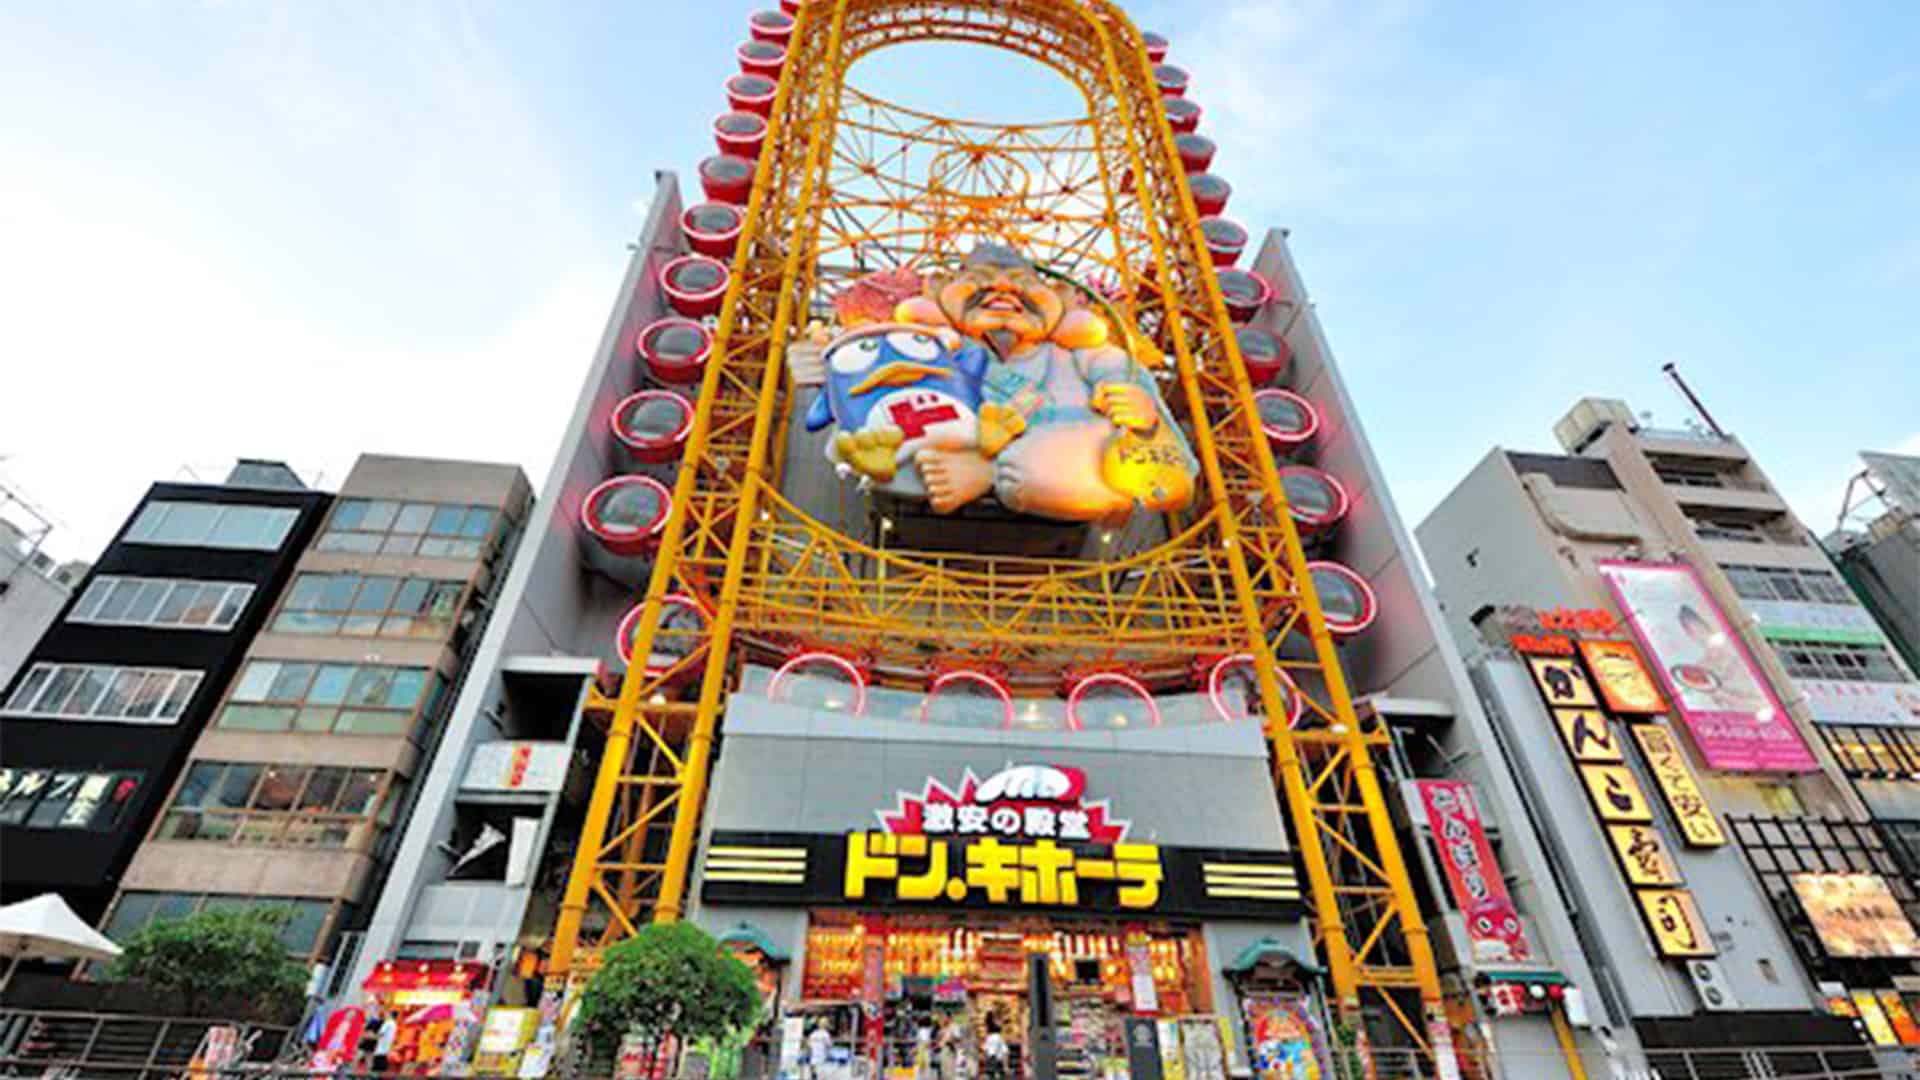 Don Quijote, Everything you need to know about this Japanese megastore